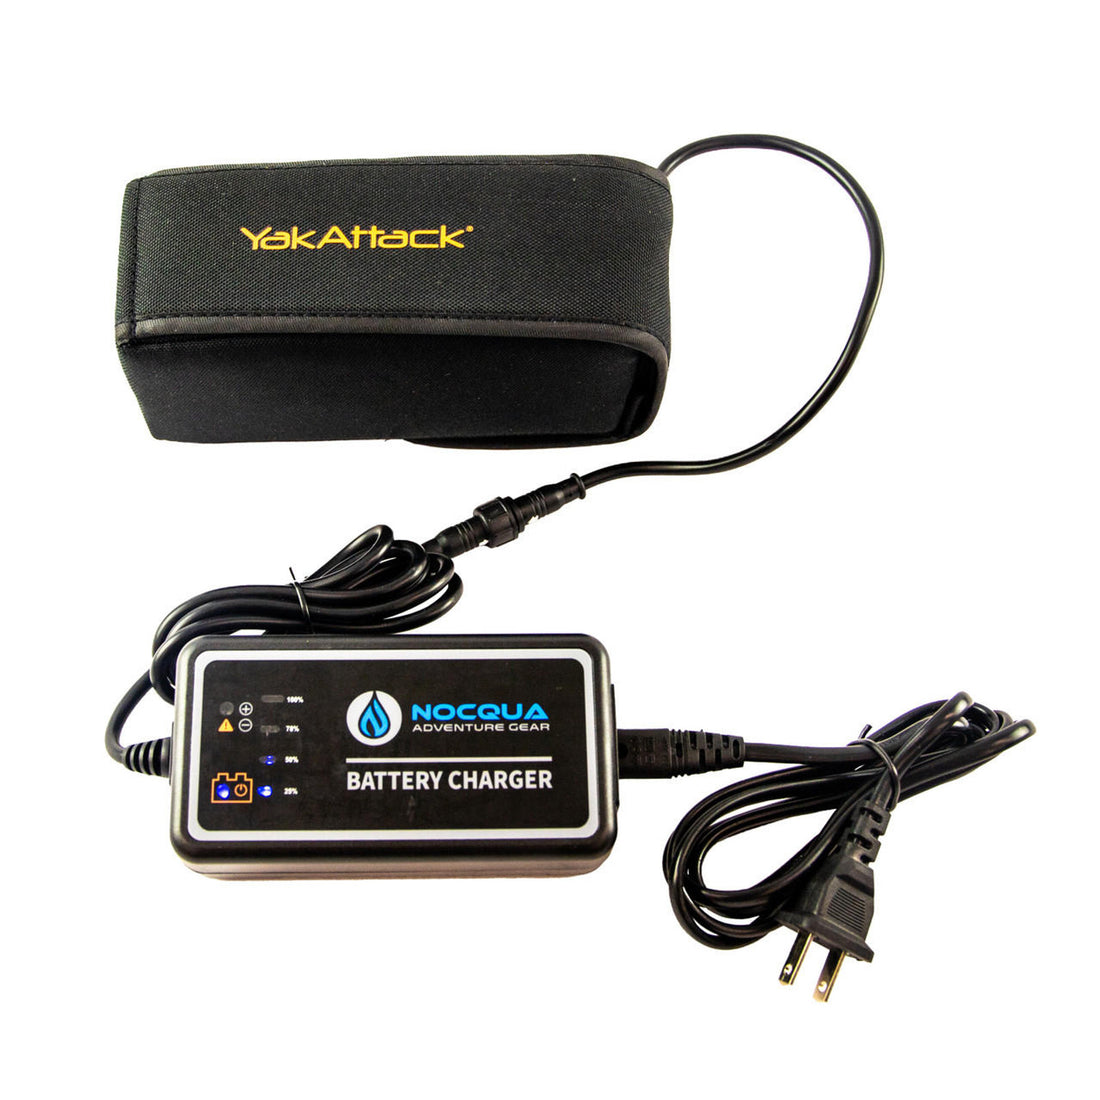 YakAttack Battery Power Kit. Lithium-Ion Water Resistant Battery Pack with Charger